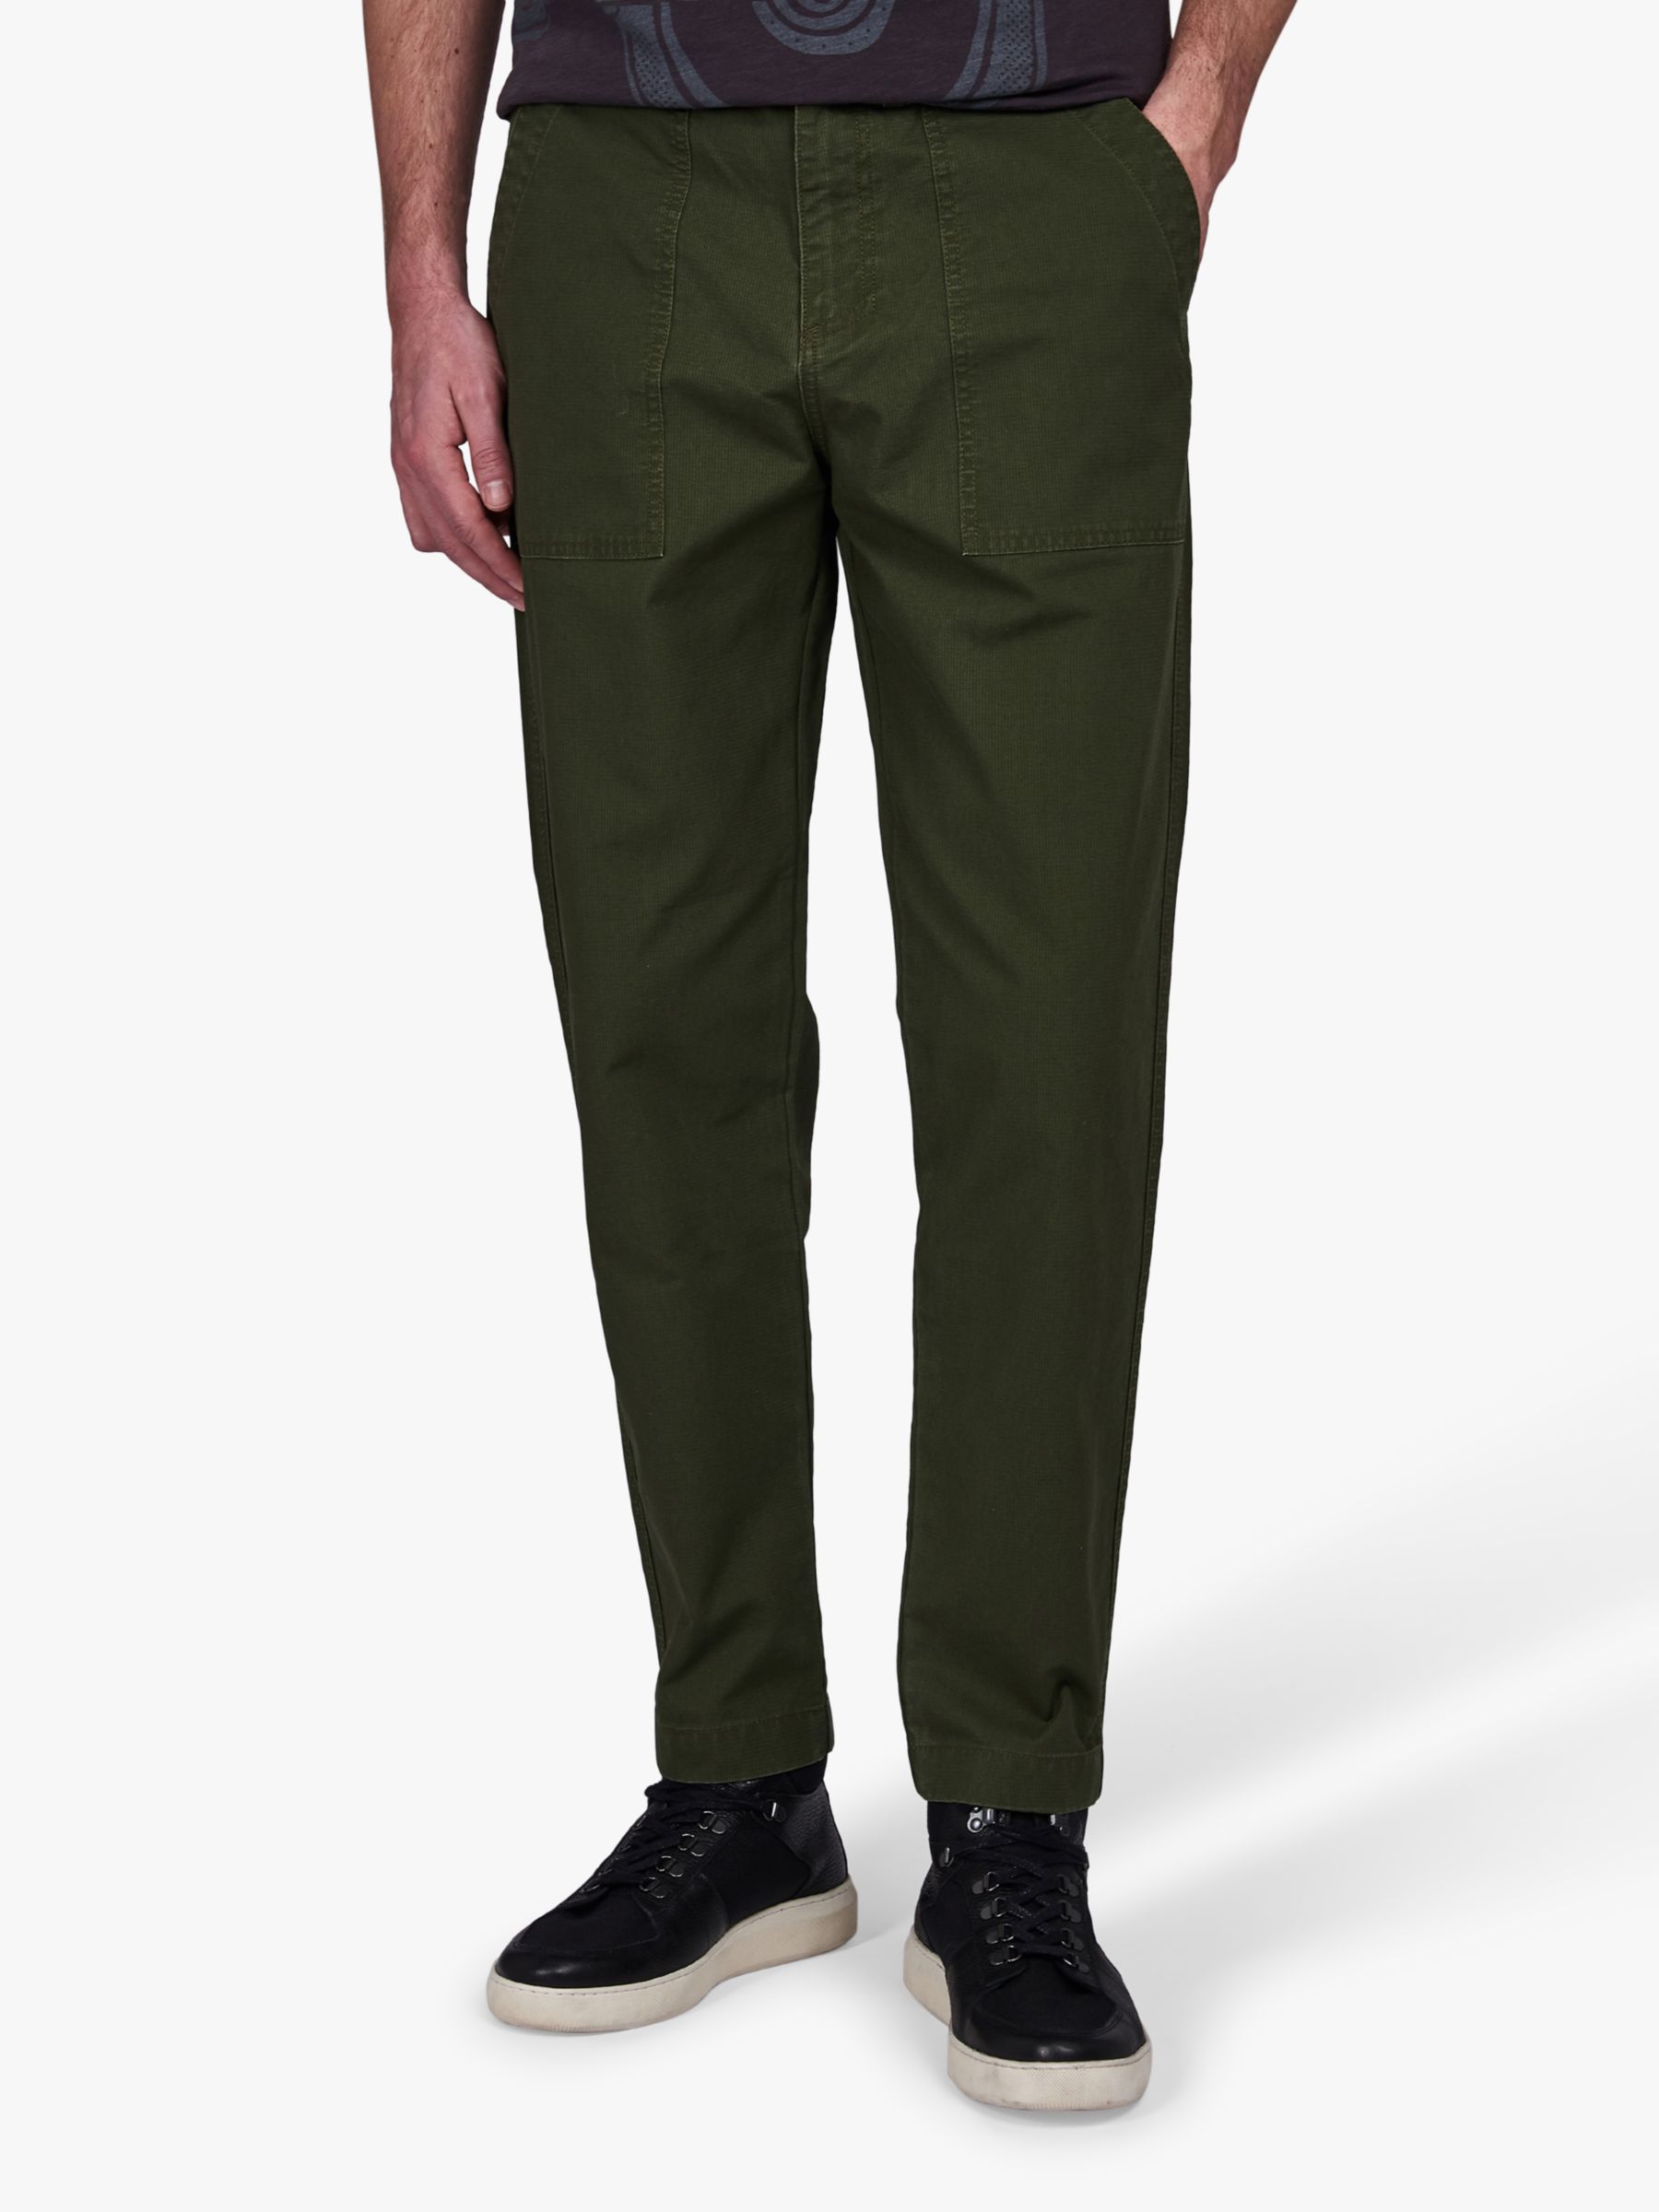 Barbour International Garment Dyed Trousers, Strong Olive at John Lewis ...